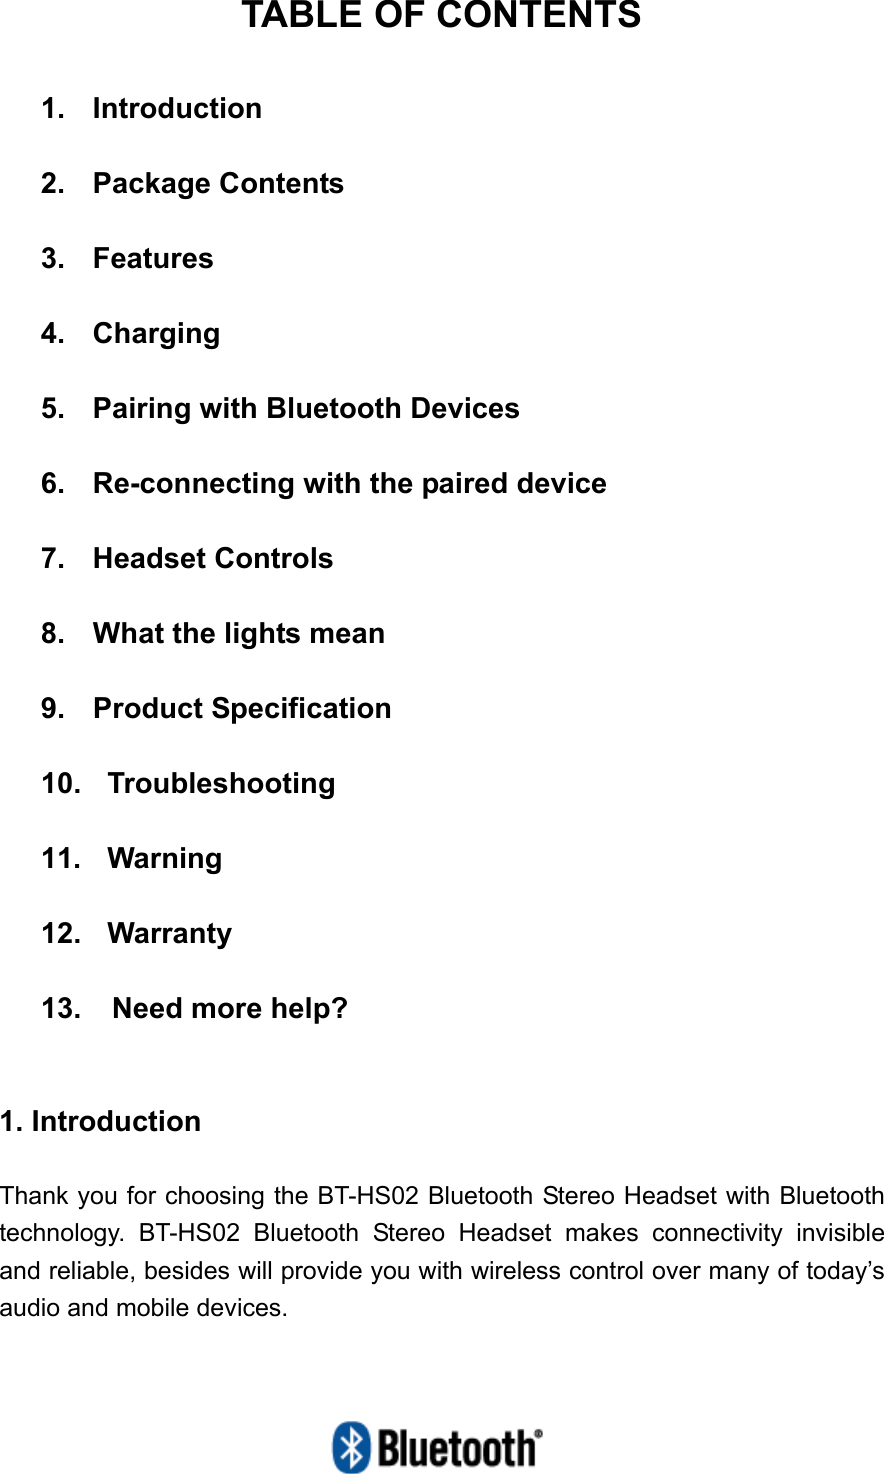   TABLE OF CONTENTS  1.  Introduction  2.  Package Contents  3.  Features  4.  Charging  5.    Pairing with Bluetooth Devices  6.    Re-connecting with the paired device  7.  Headset Controls  8.  What the lights mean  9. Product Specification  10.  Troubleshooting  11.  Warning  12.  Warranty  13.  Need more help?   1. Introduction  Thank you for choosing the BT-HS02 Bluetooth Stereo Headset with Bluetooth technology. BT-HS02 Bluetooth Stereo Headset makes connectivity invisible and reliable, besides will provide you with wireless control over many of today’s audio and mobile devices. 